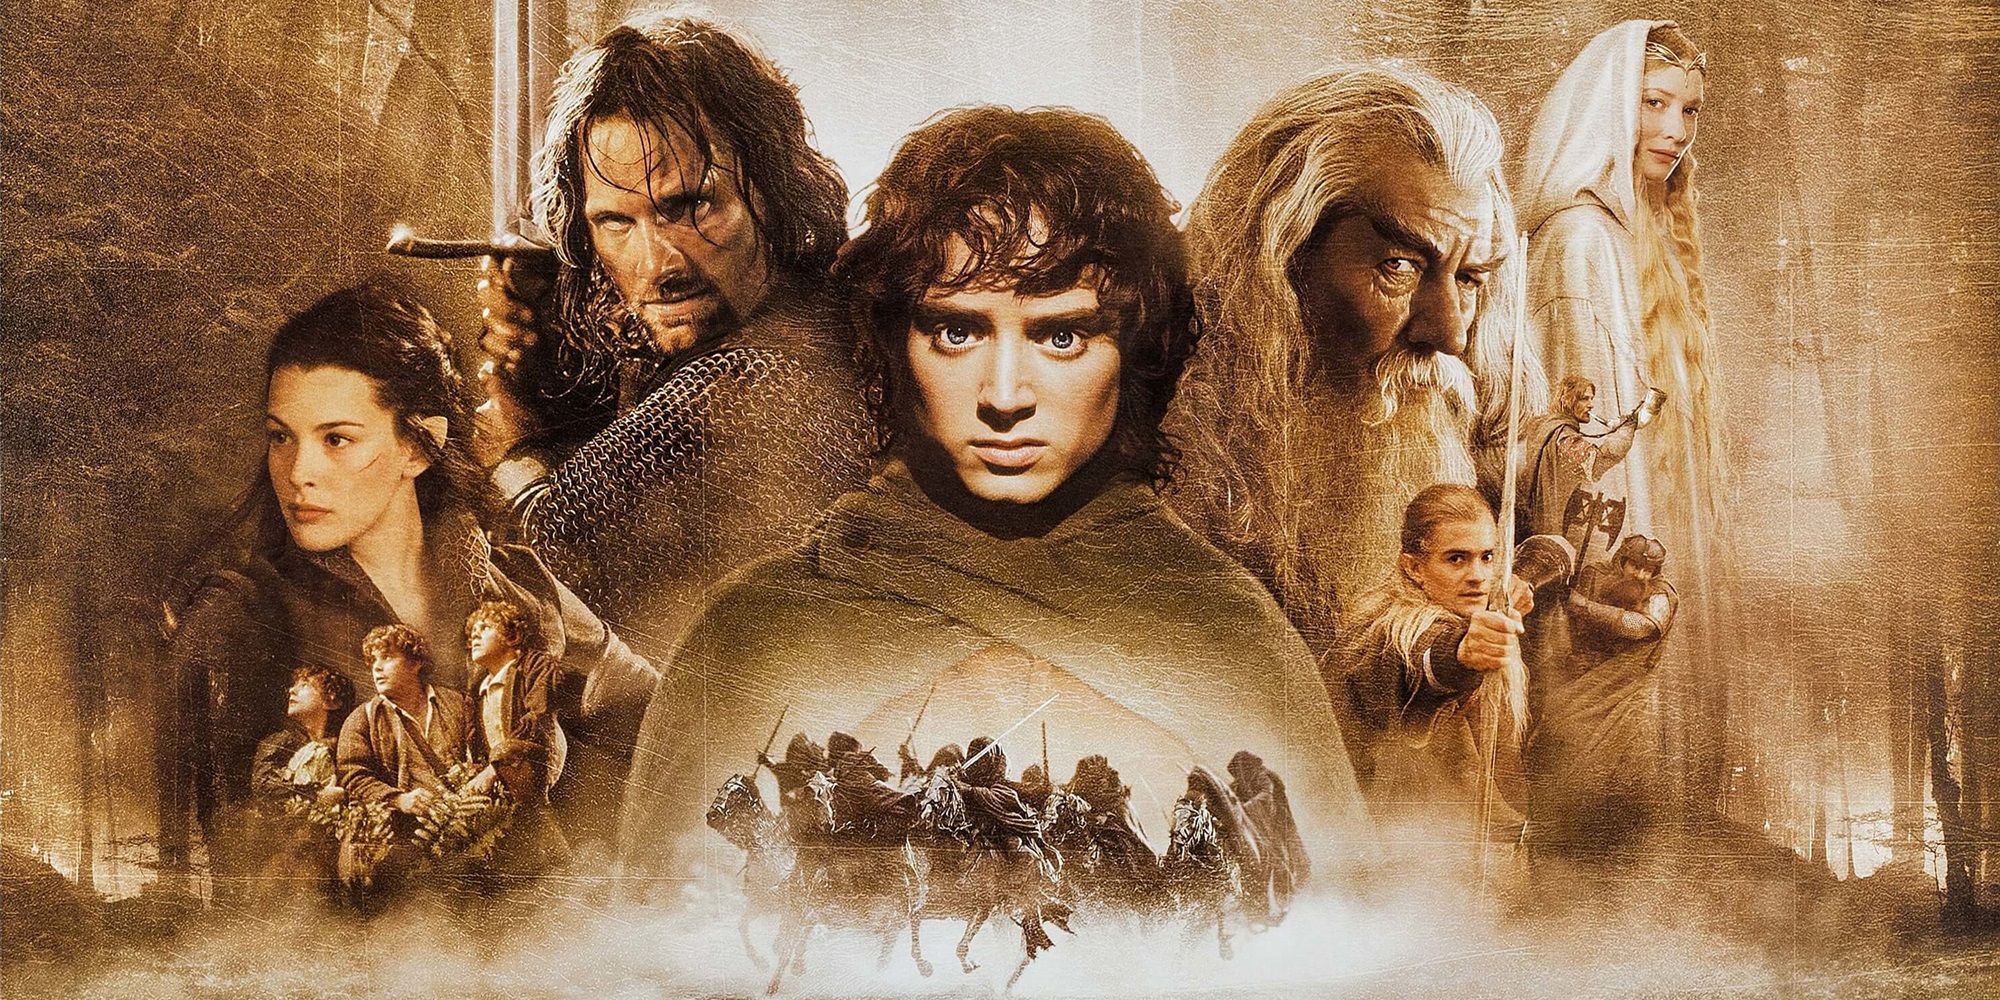 The poster for The Lord of the Rings The Fellowship of the Ring